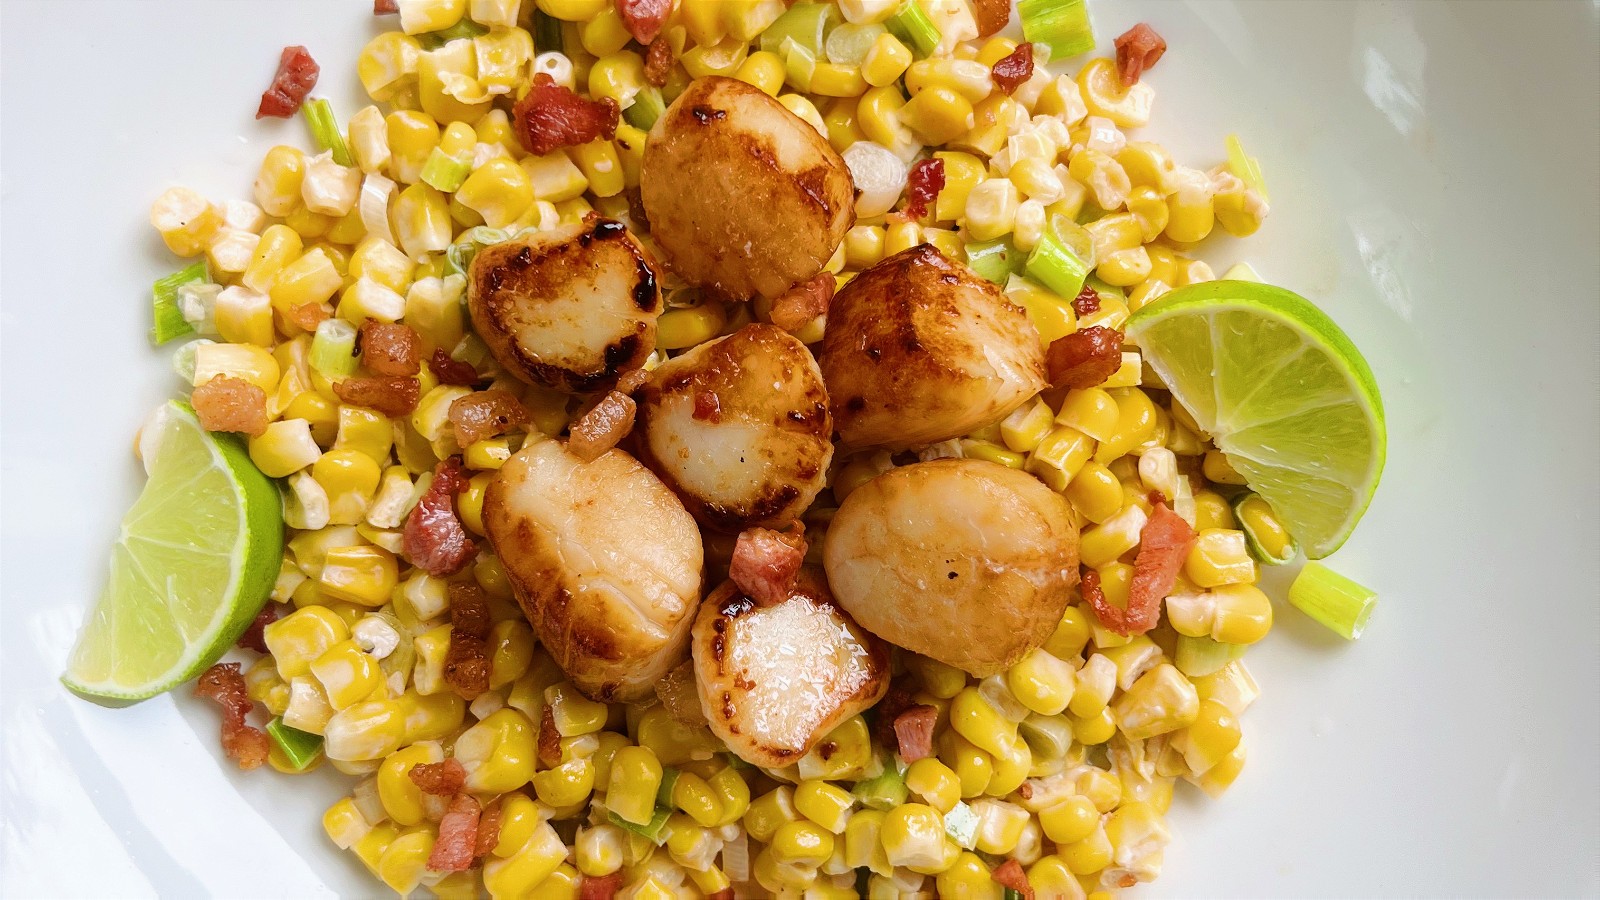 Image of Seared Scallops with Creamy Corn and Pancetta